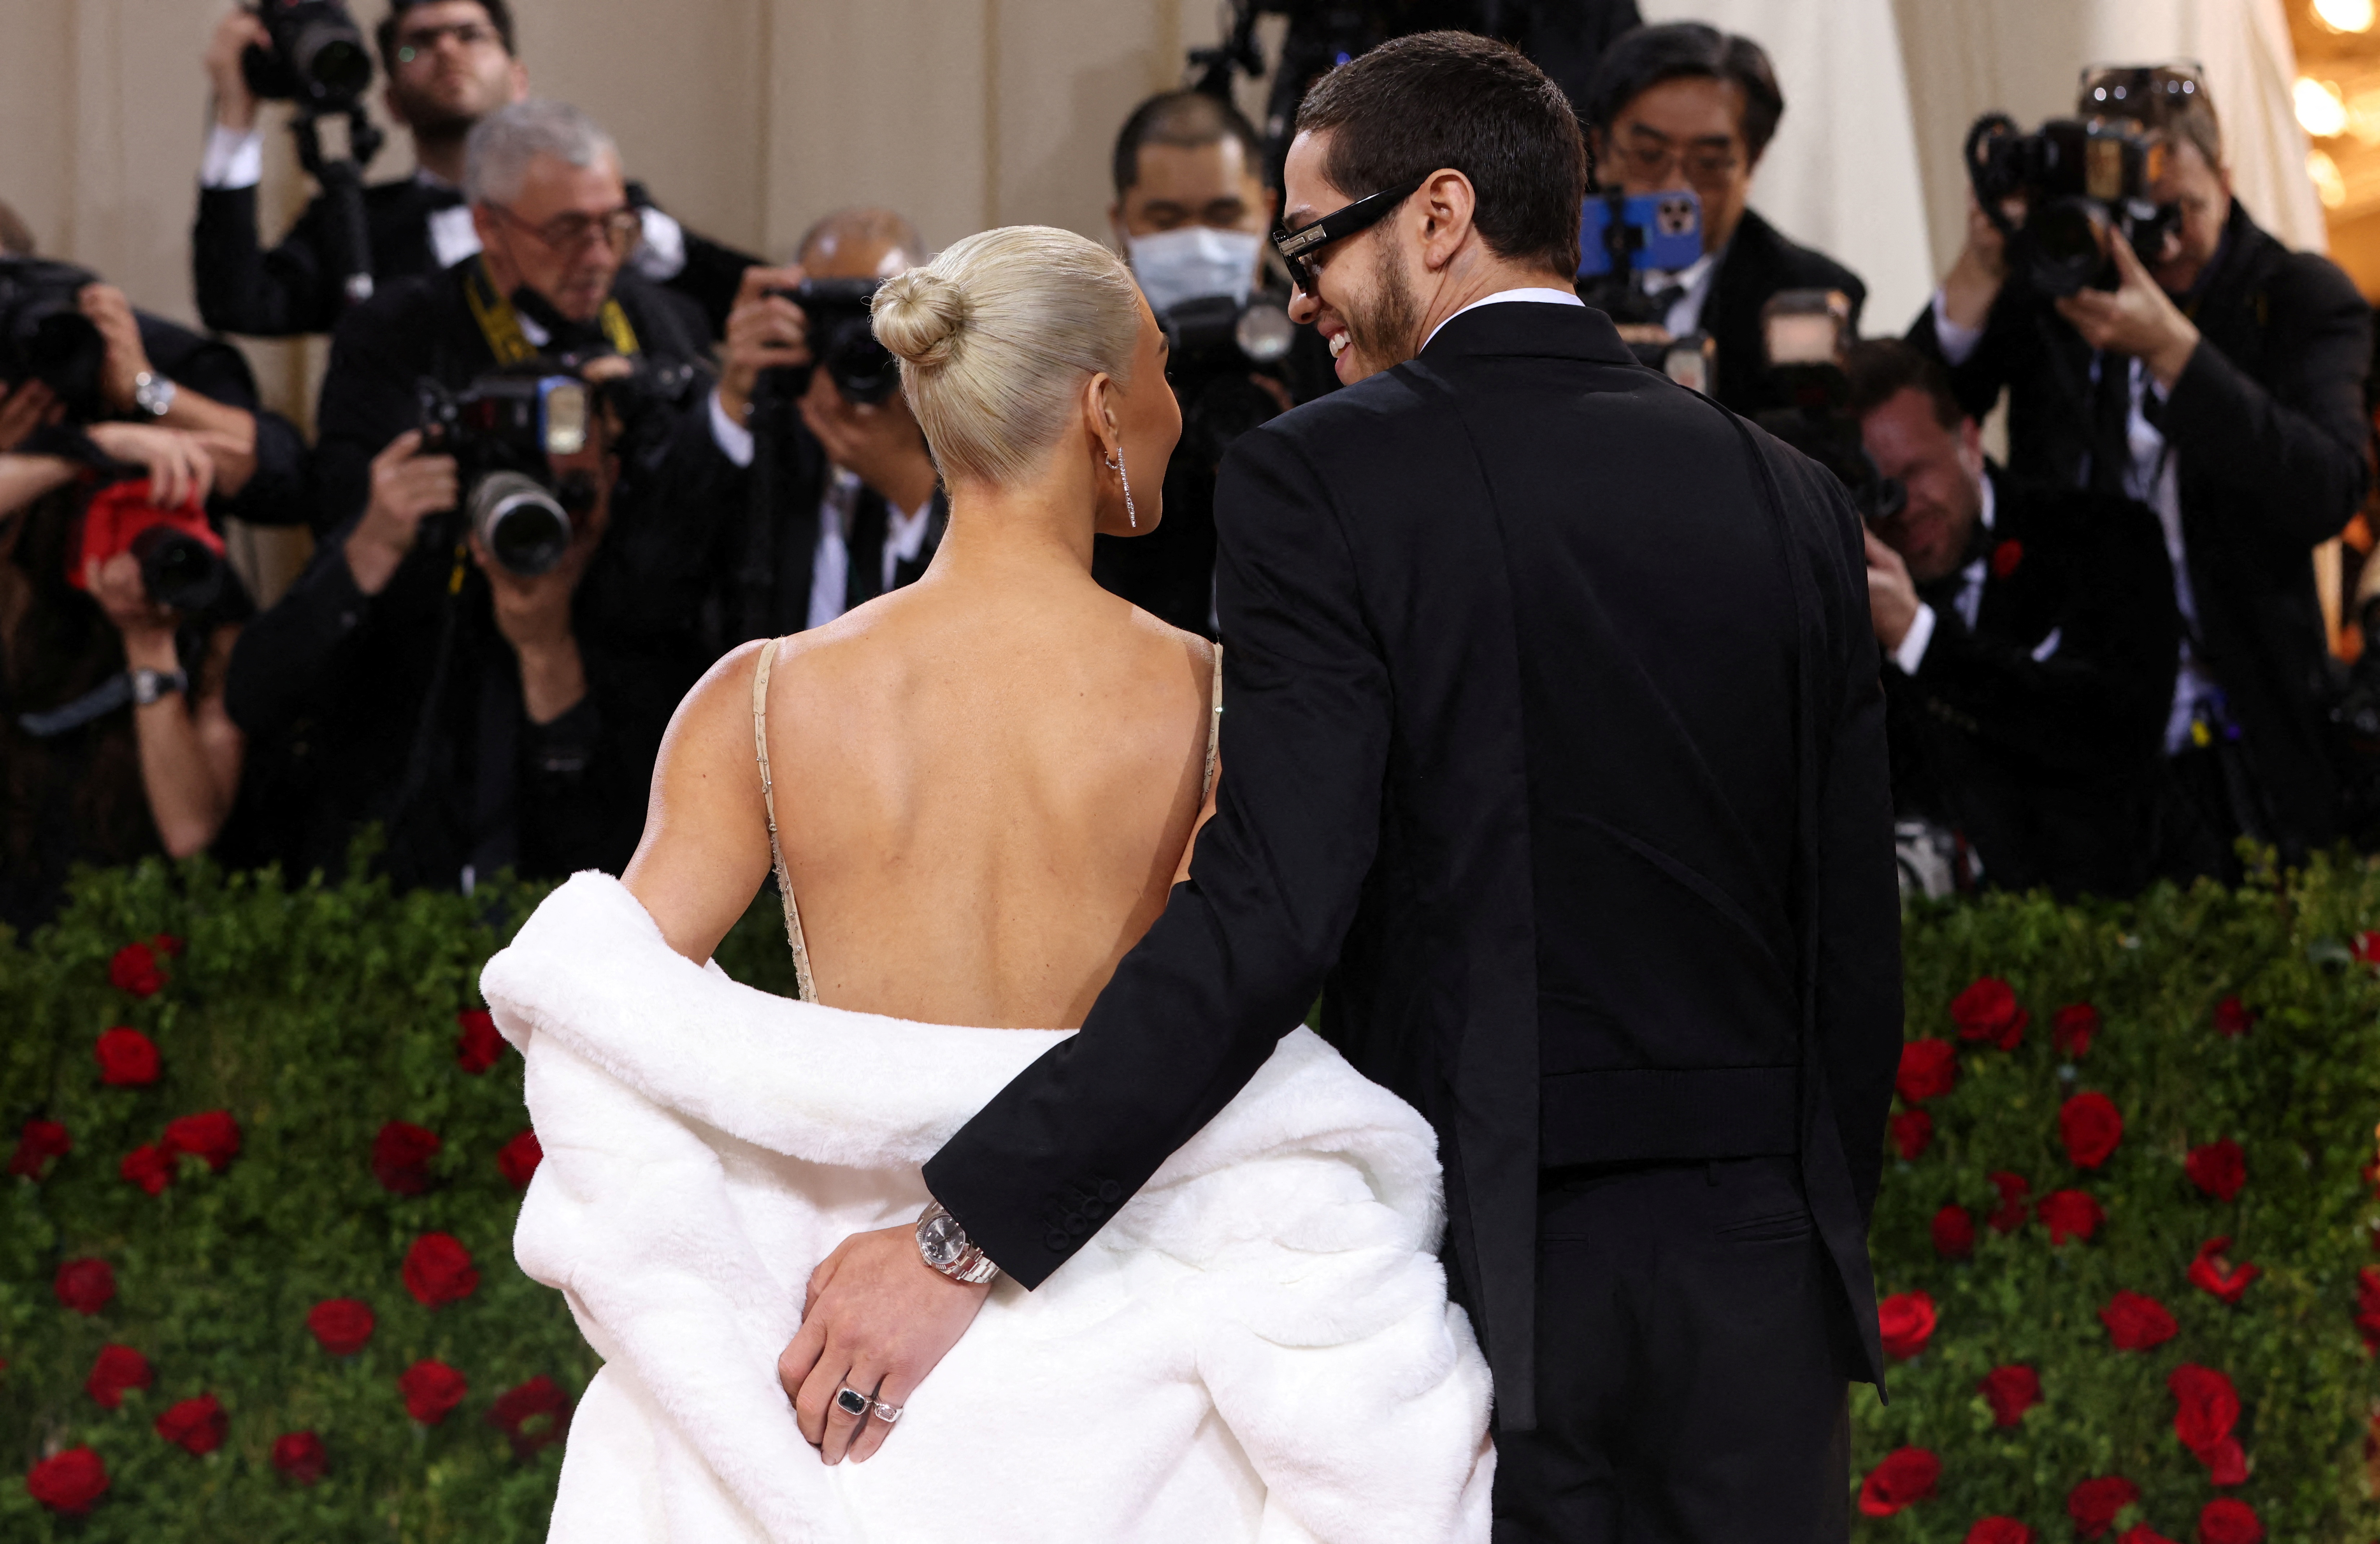 Kim Kardashian and Pete Davidson's romance ended after 9 months (Photo: REUTERS/Andrew Kelly TPX IMAGES OF THE DAY)